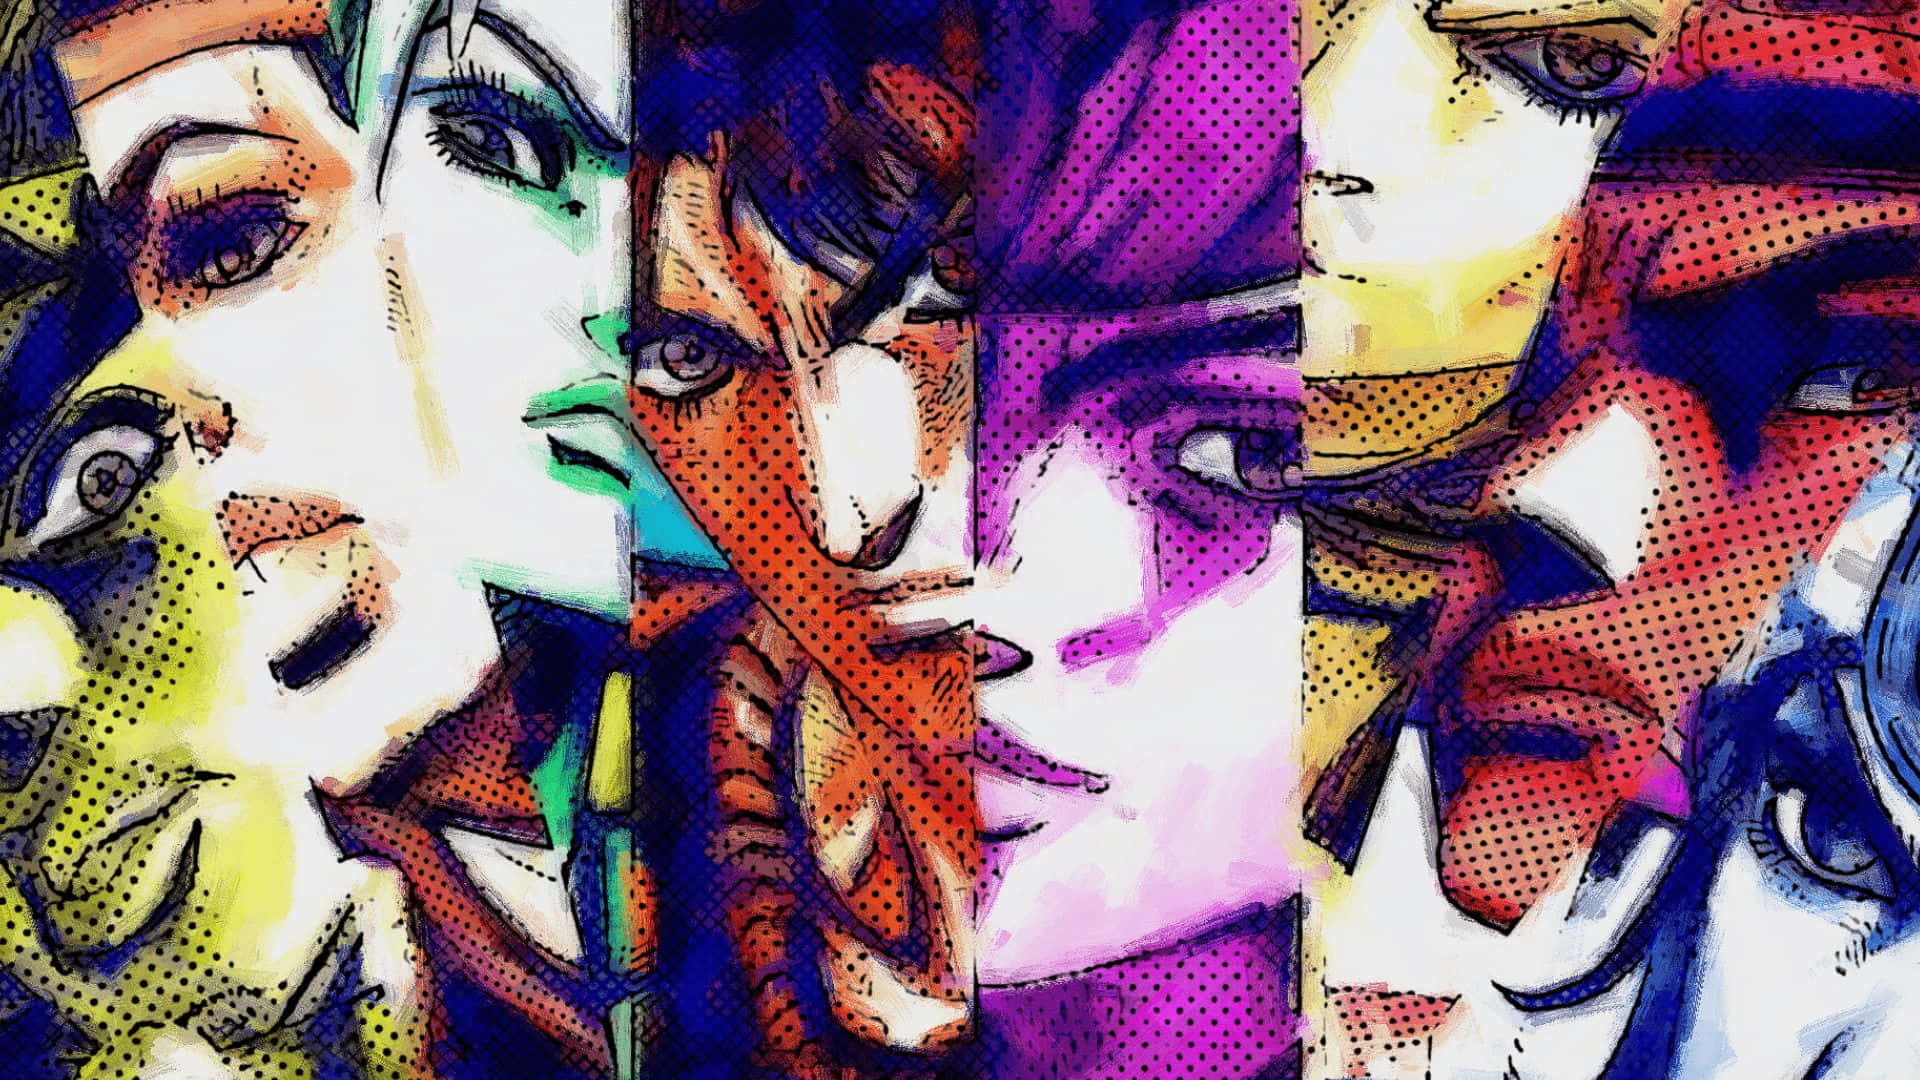 Joseph Joestar In Action - Defining A Generation Of Anime Heroes Background